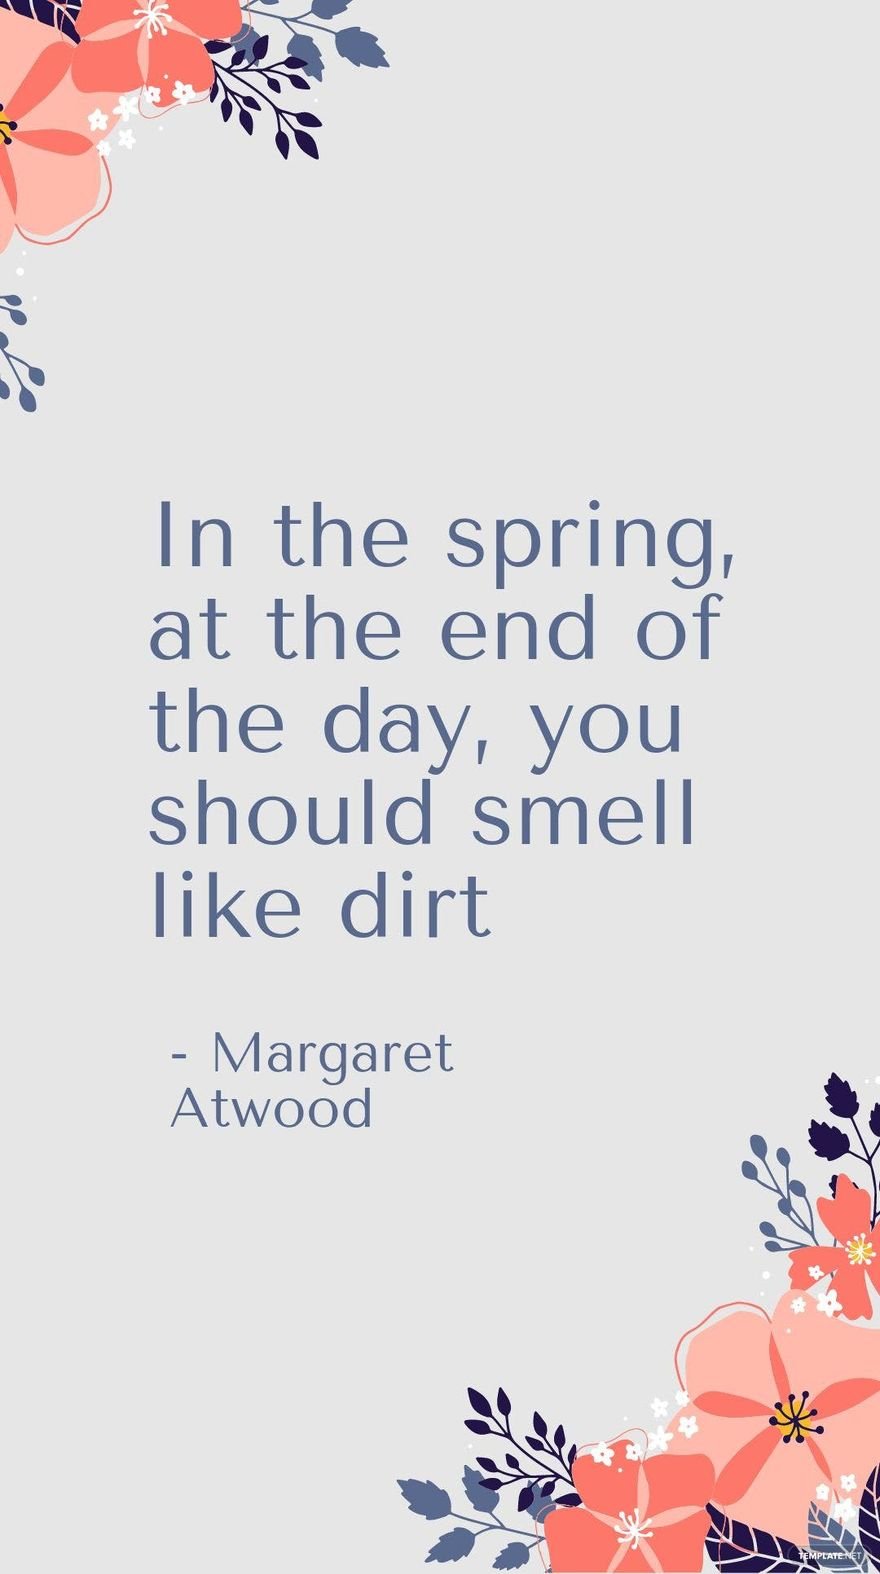 Margaret Atwood - In the spring, at the end of the day, you should smell like dirt in JPG